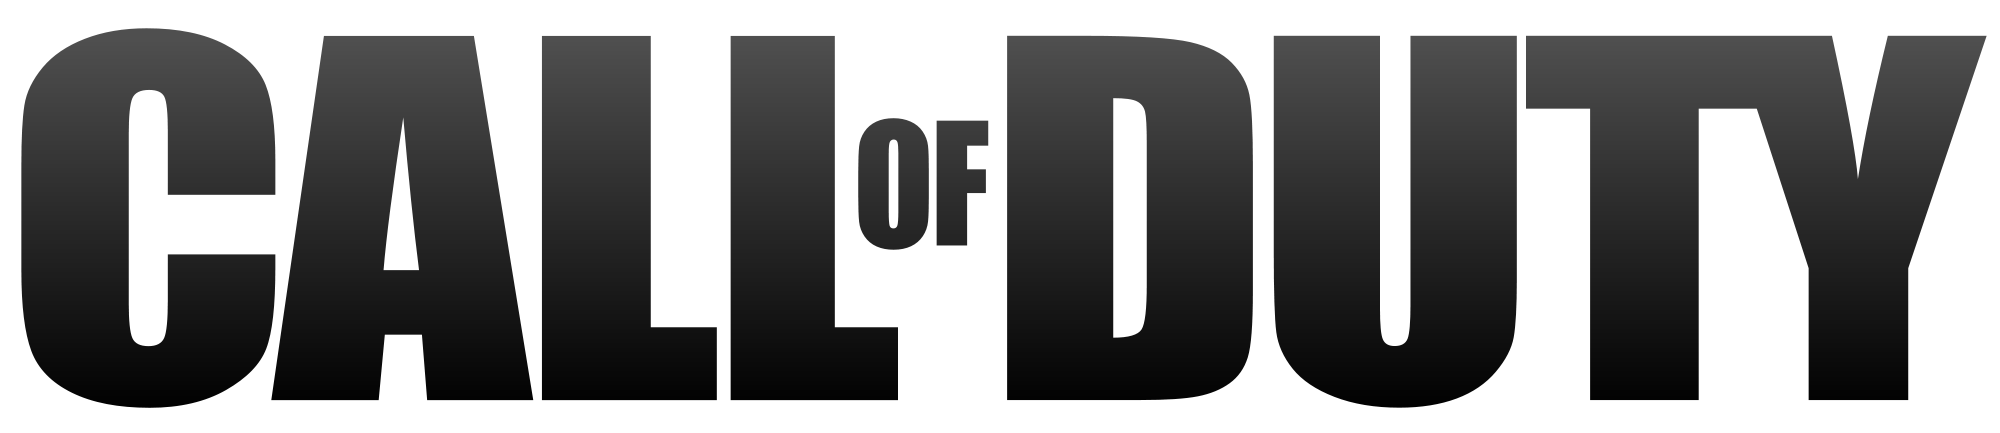 Call Of Duty Logo Png Images,